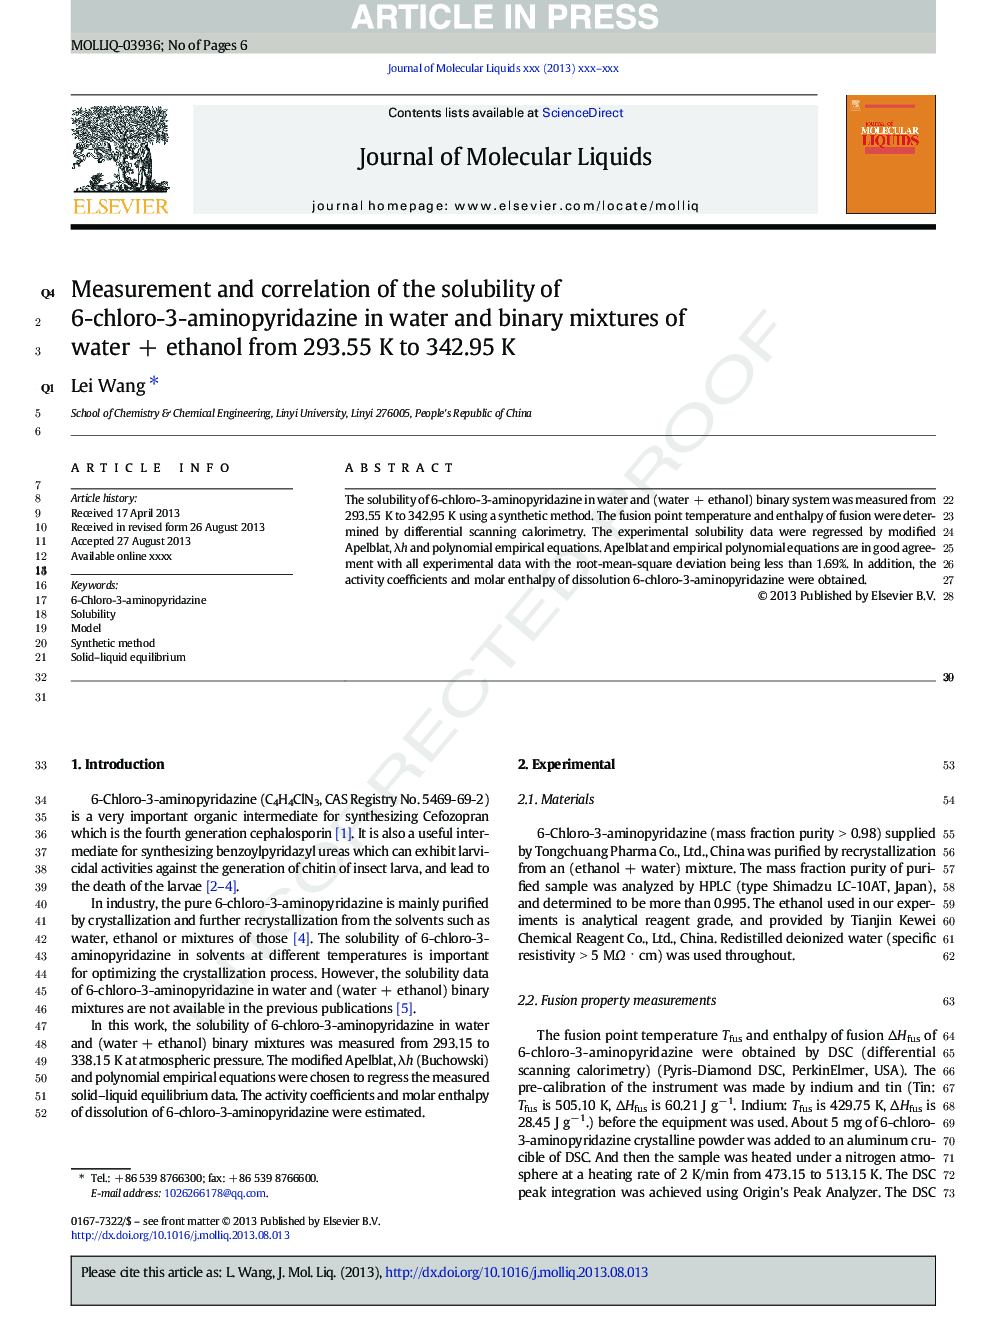 Measurement and correlation of the solubility of 6-chloro-3-aminopyridazine in water and binary mixtures of waterÂ +Â ethanol from 293.55Â K to 342.95Â K